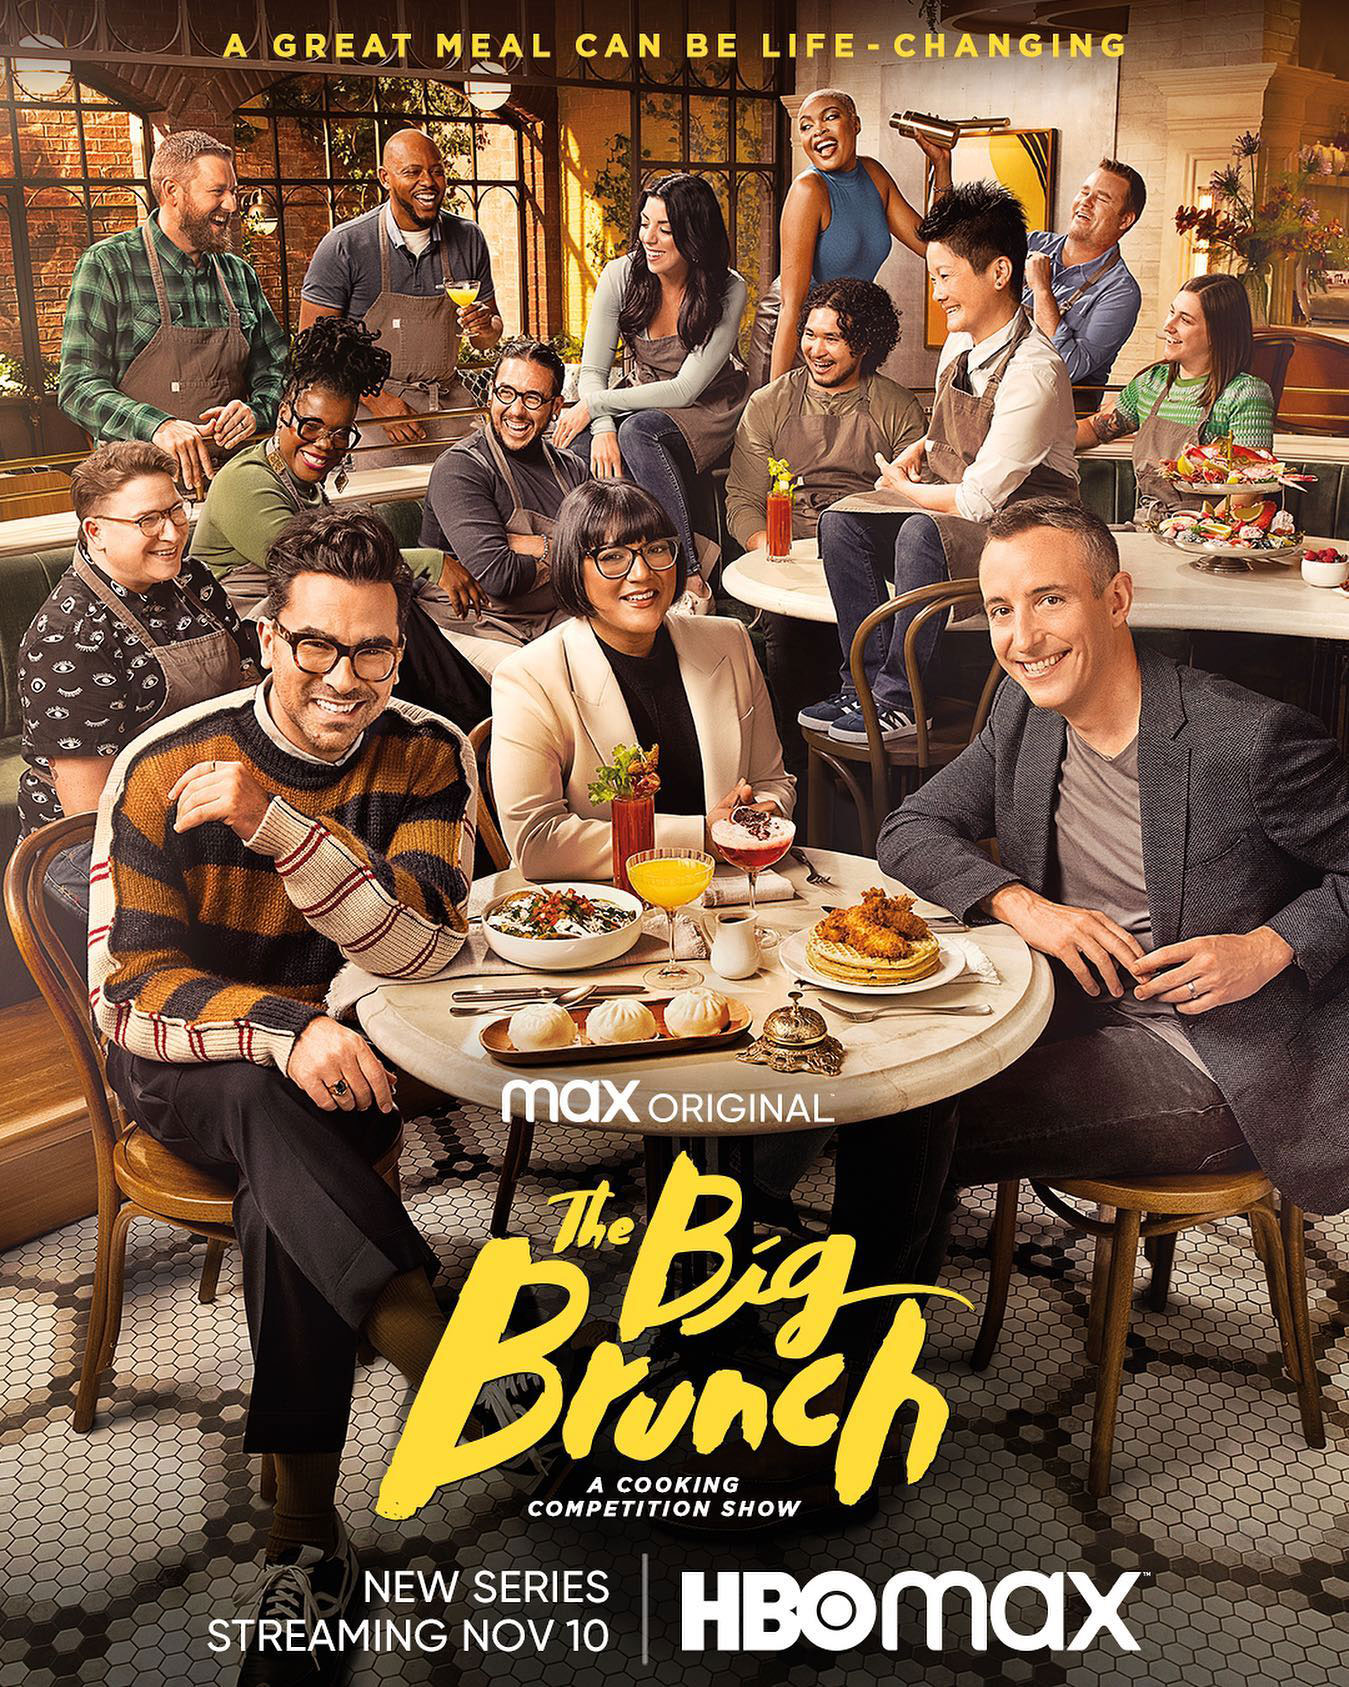 The Big Brunch promo photo for HBO Max